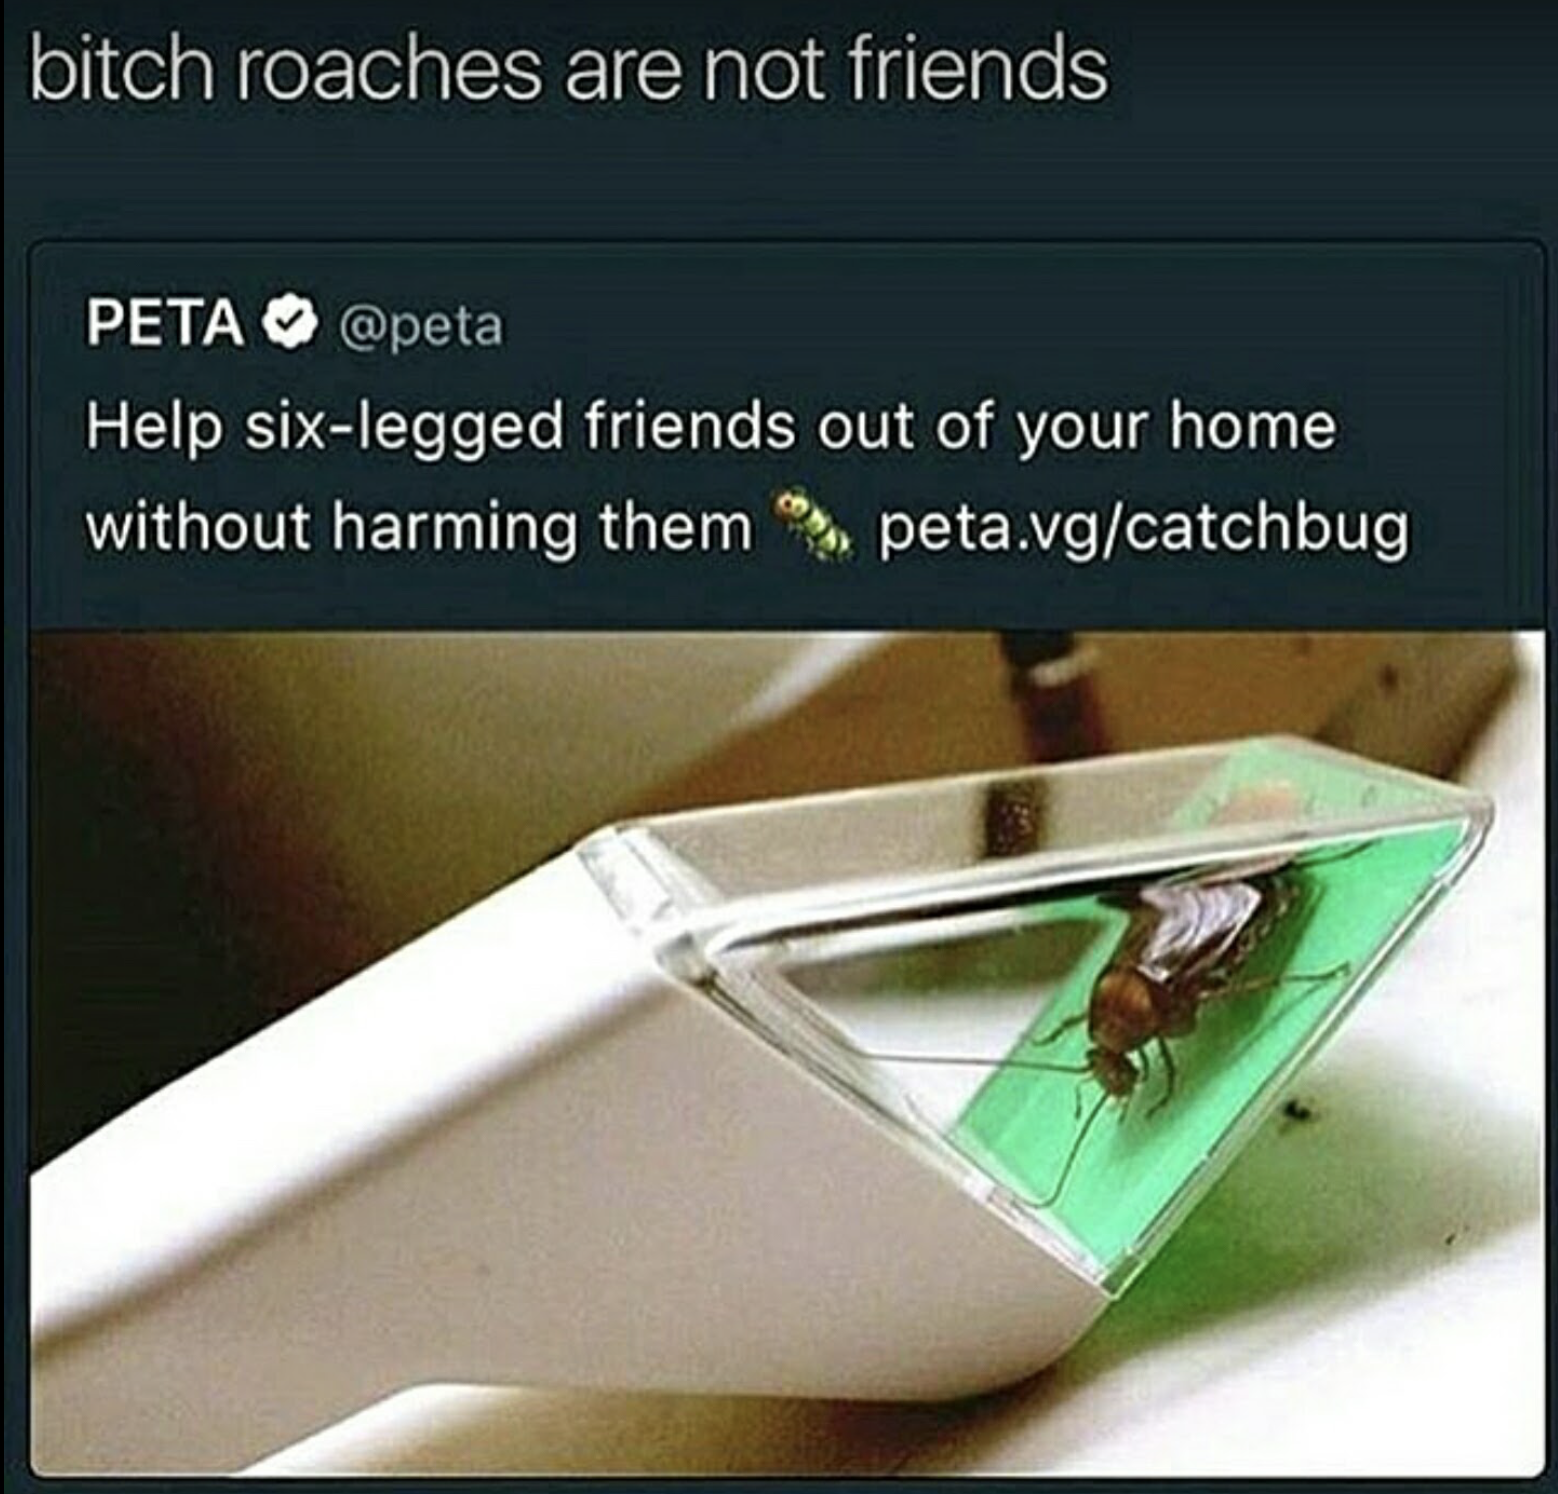 mf uh roach - bitch roaches are not friends Peta Help sixlegged friends out of your home without harming them peta.vgcatchbug